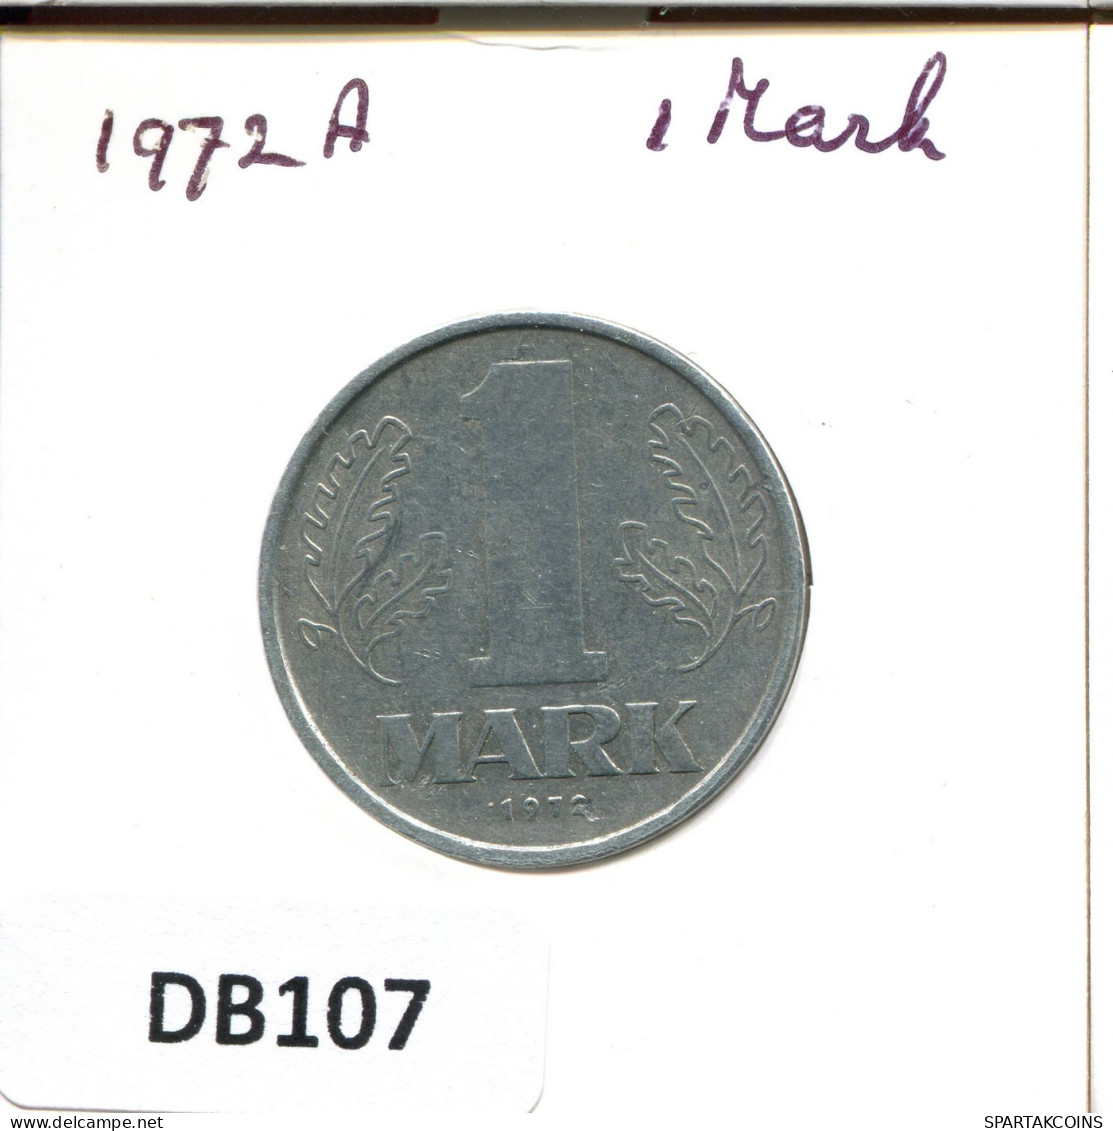 1 MARK 1972 A DDR EAST ALLEMAGNE Pièce GERMANY #DB107.F.A - 1 Marco